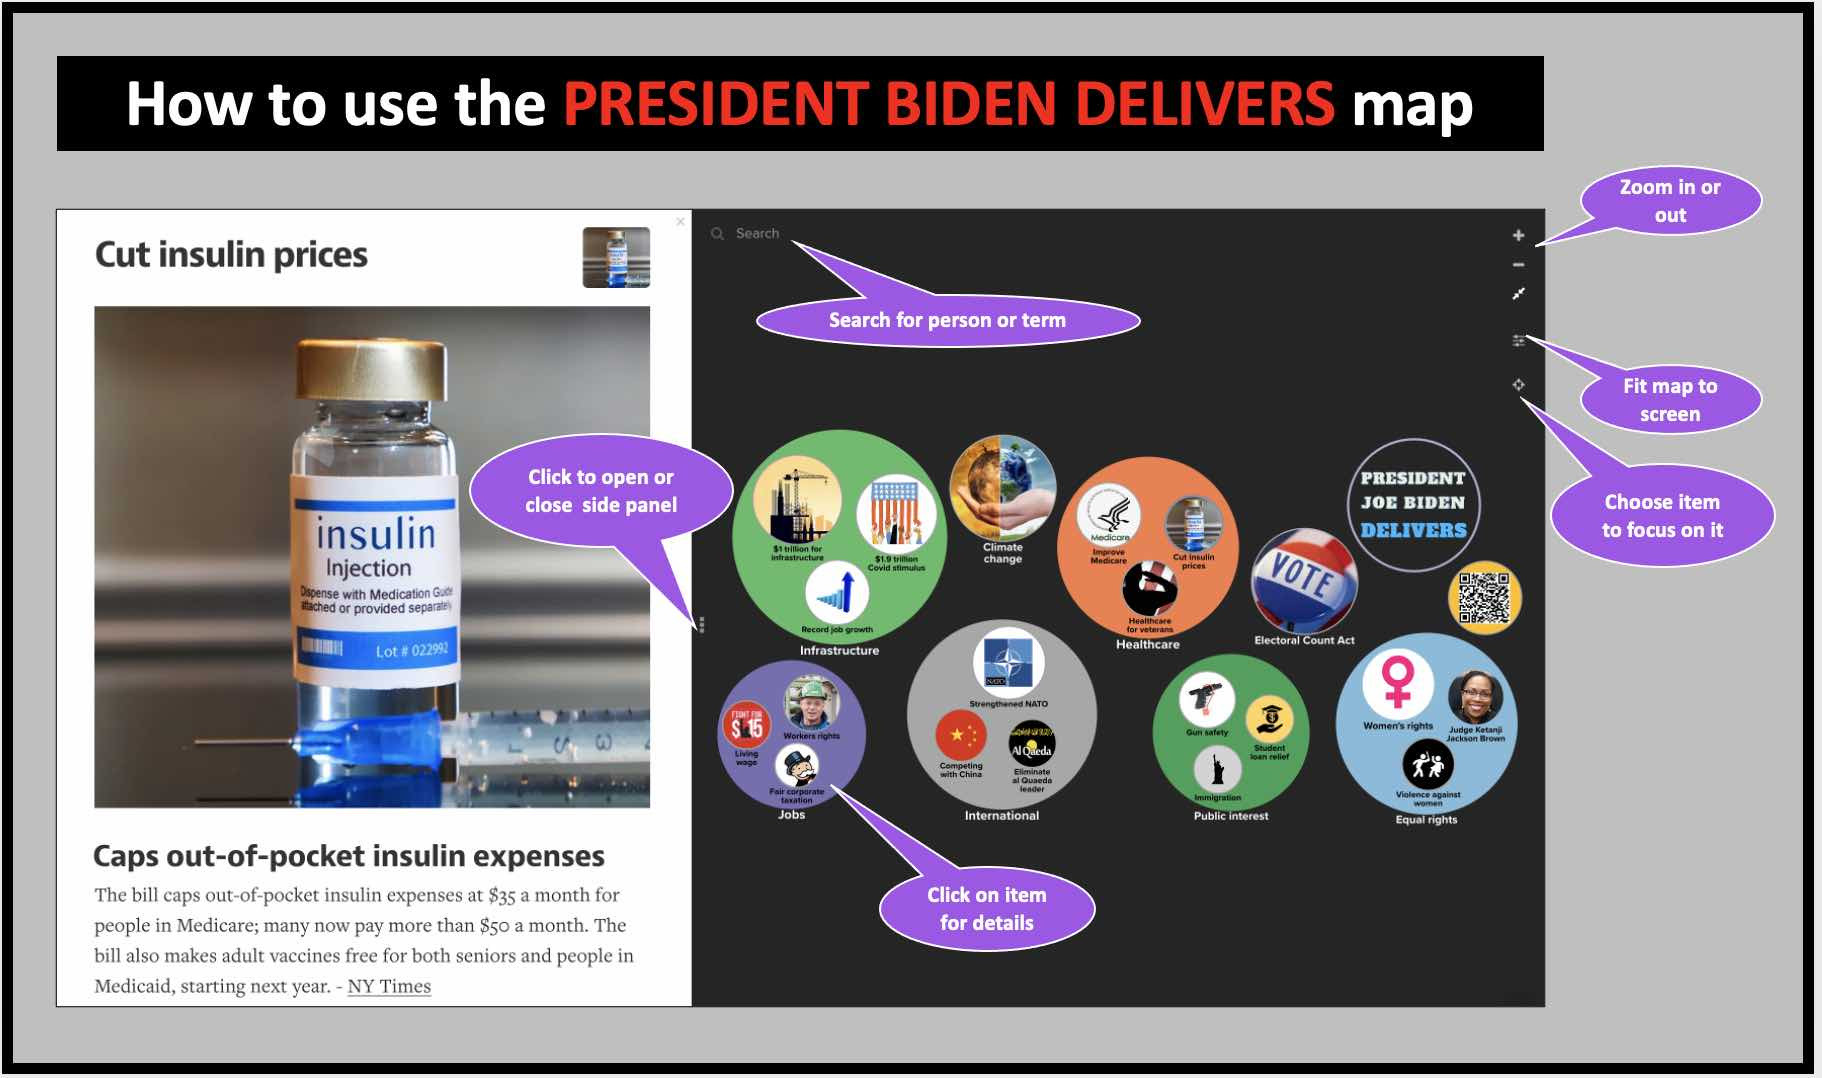 How to use the President Biden Delivers map